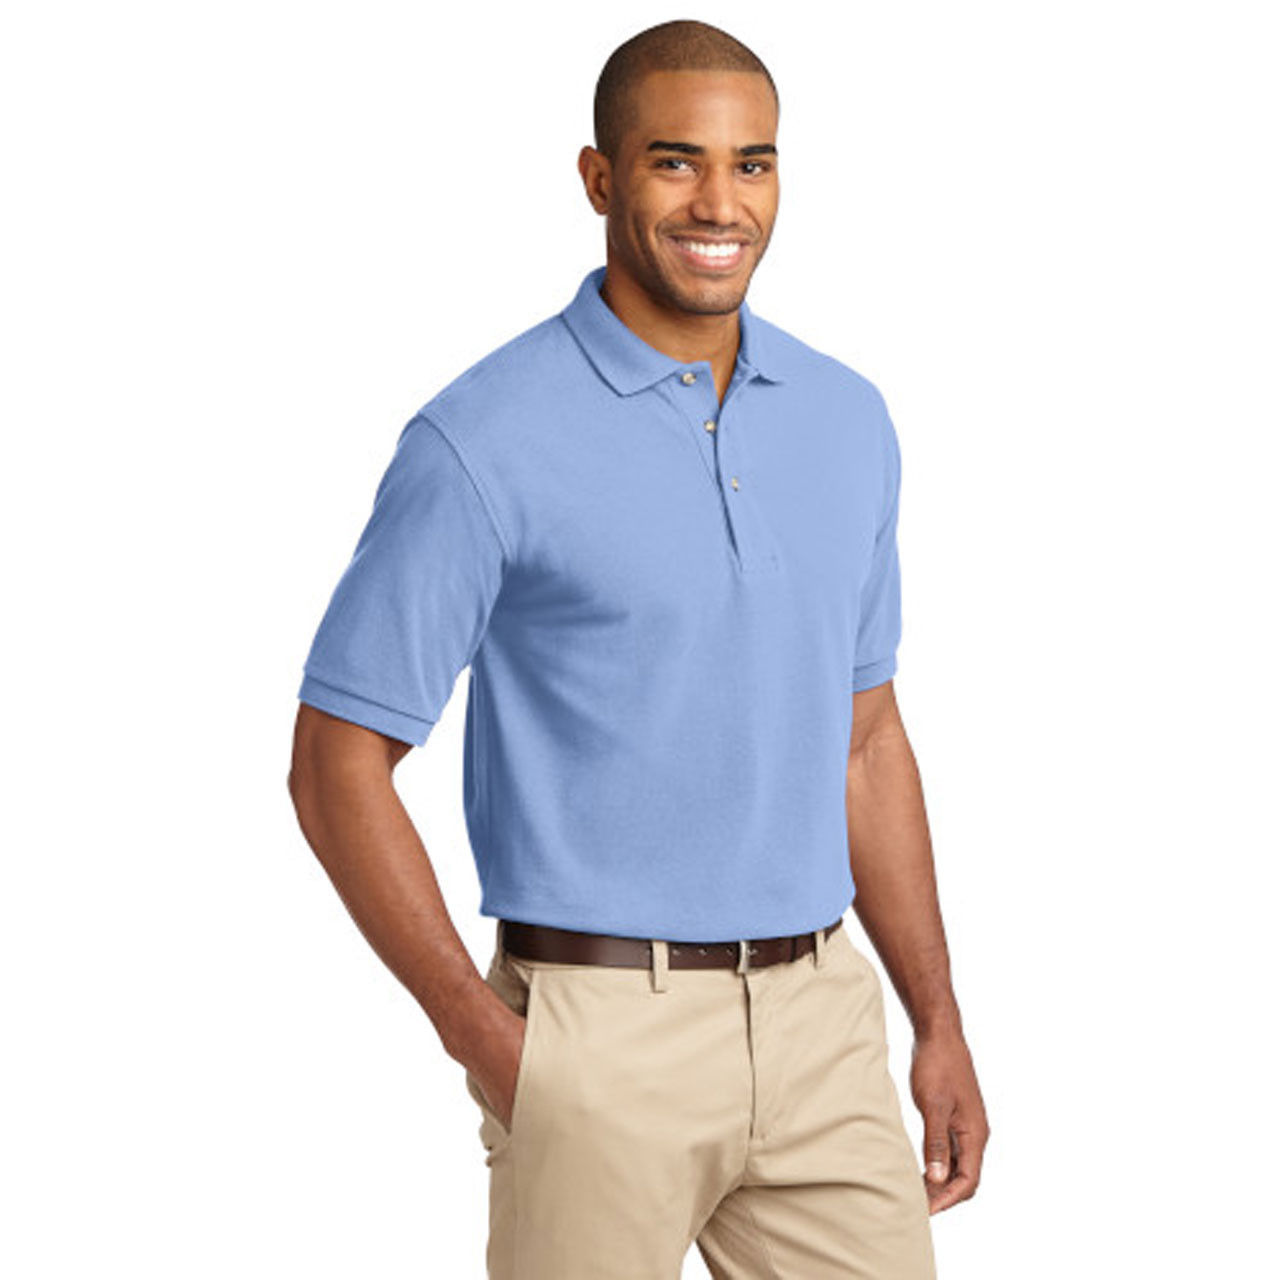 Does the blue polo with khaki pants have specific type of buttons?